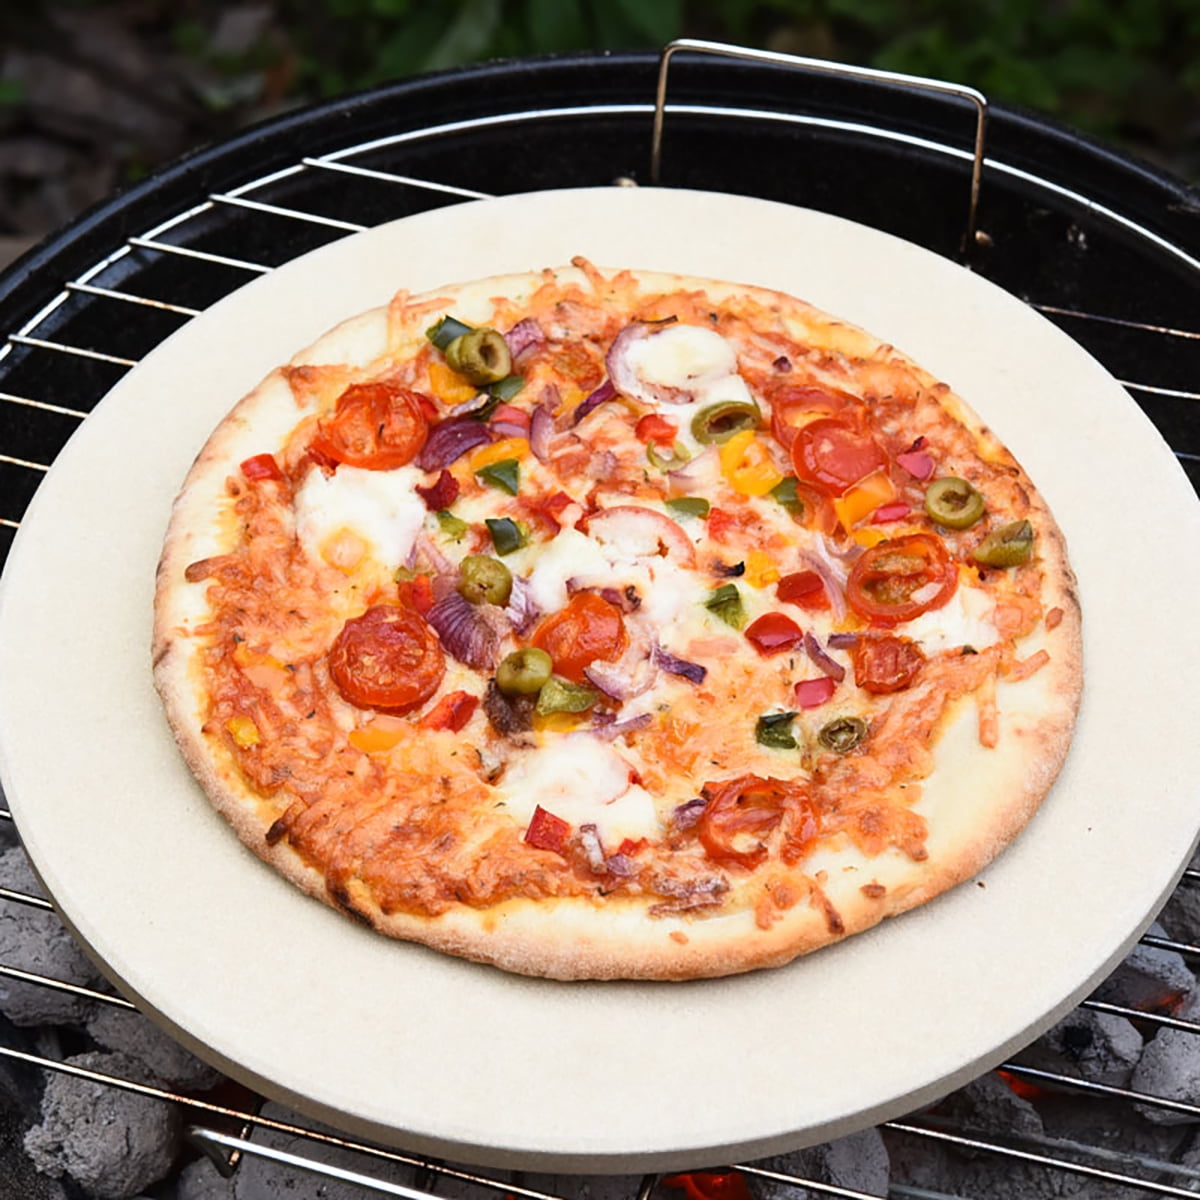 faced Built in 4 Handles Design Pizza Stone 12.6 Round Baking & Grilling Stone BBQ and Grill Perfect for Oven Innovative Double 